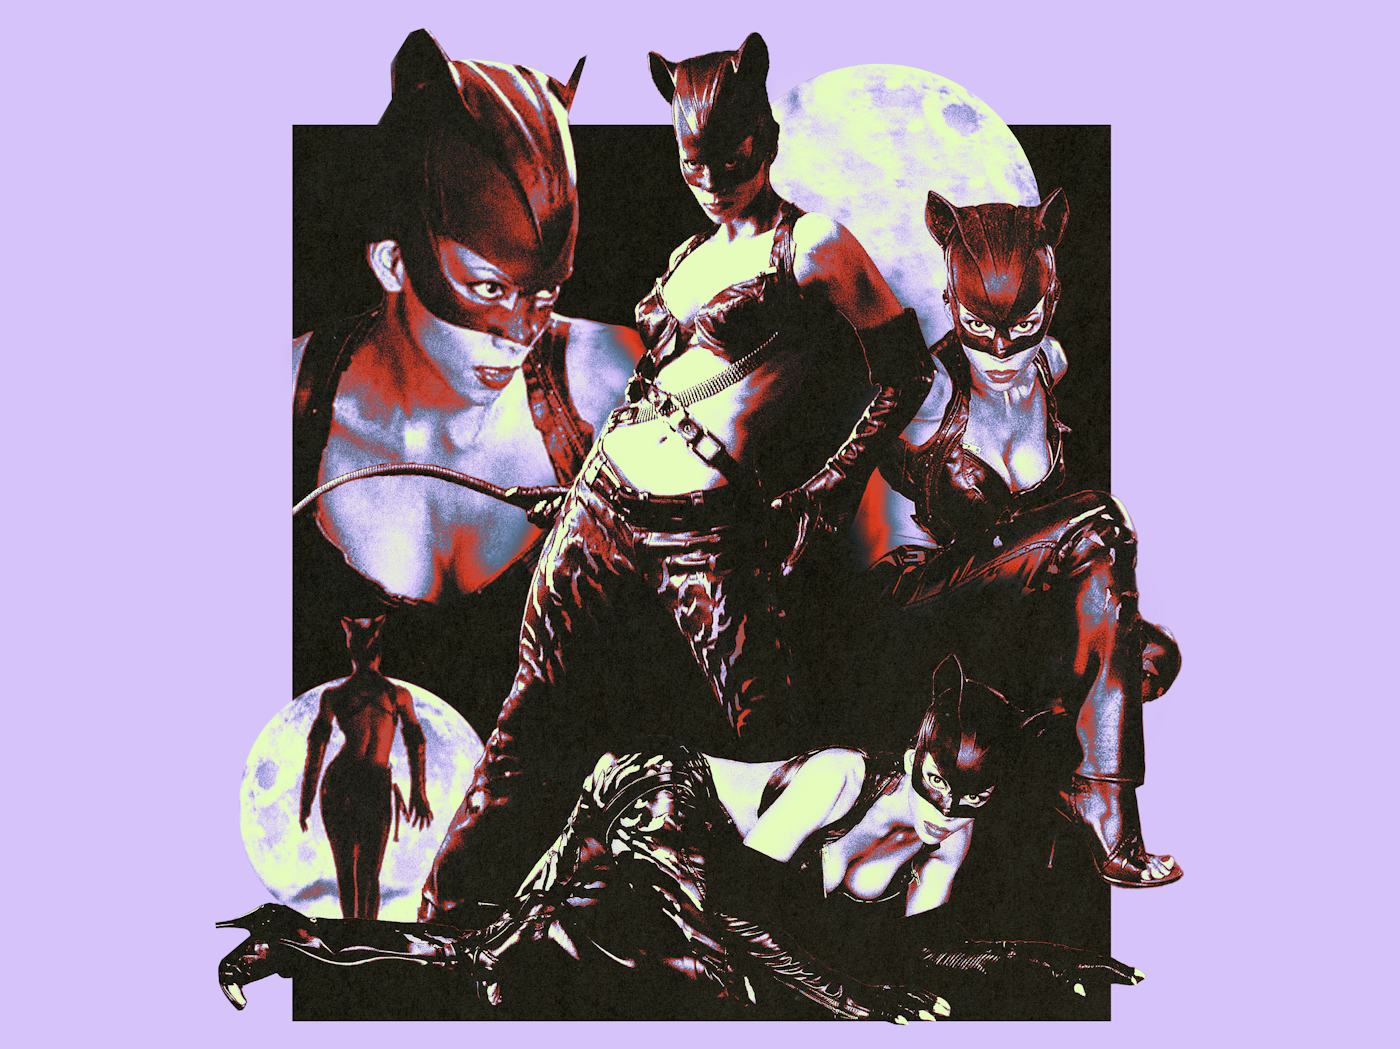 Artistic collage of multiple Catwoman illustrations in various poses against a purple background with a full moon.